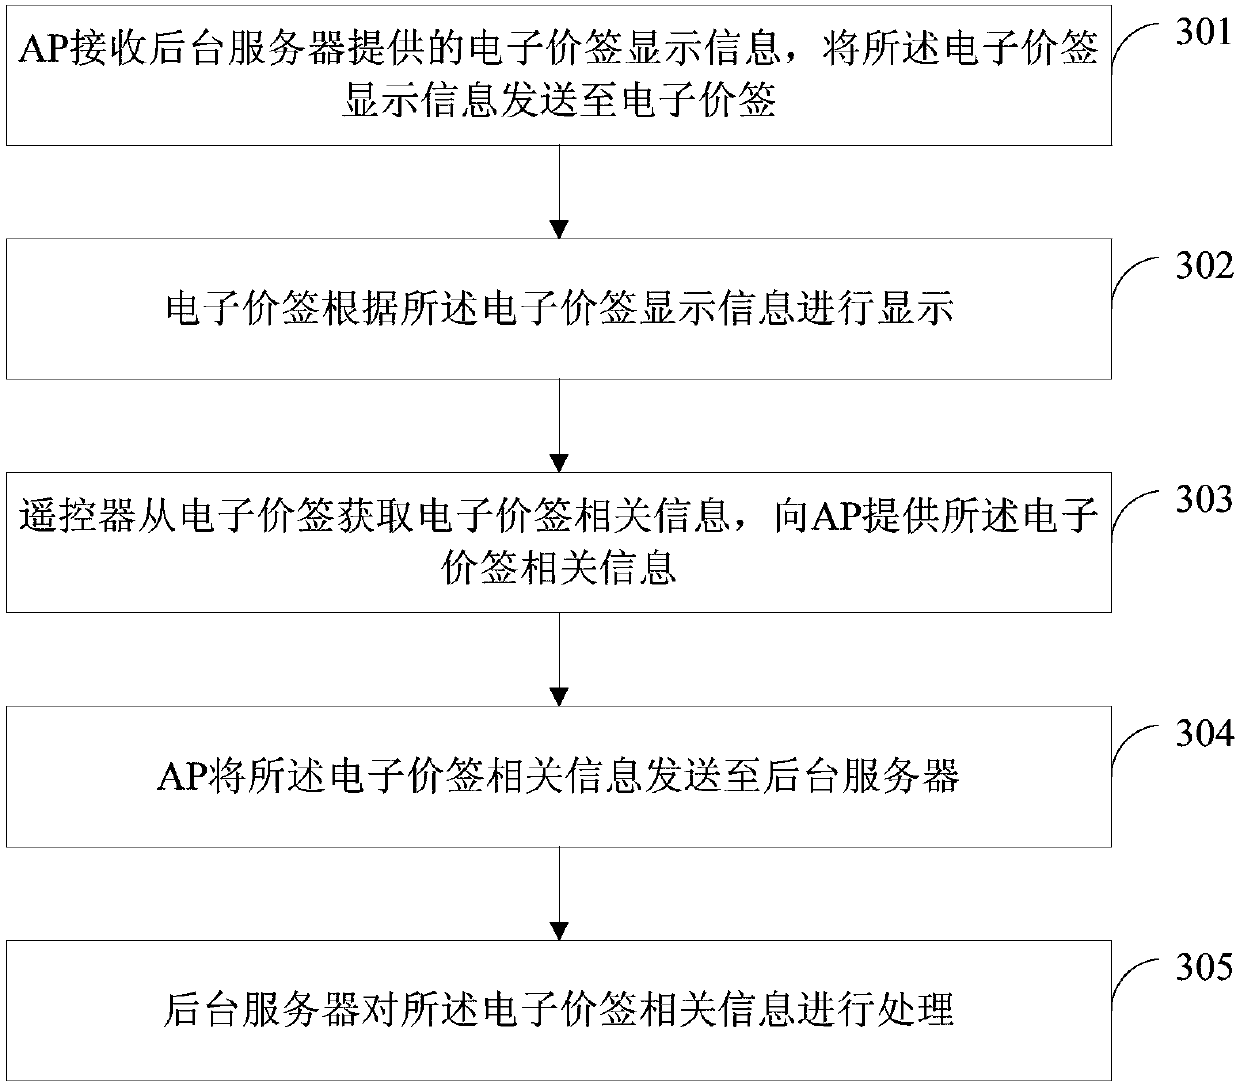 Electronic price tag information processing system and method